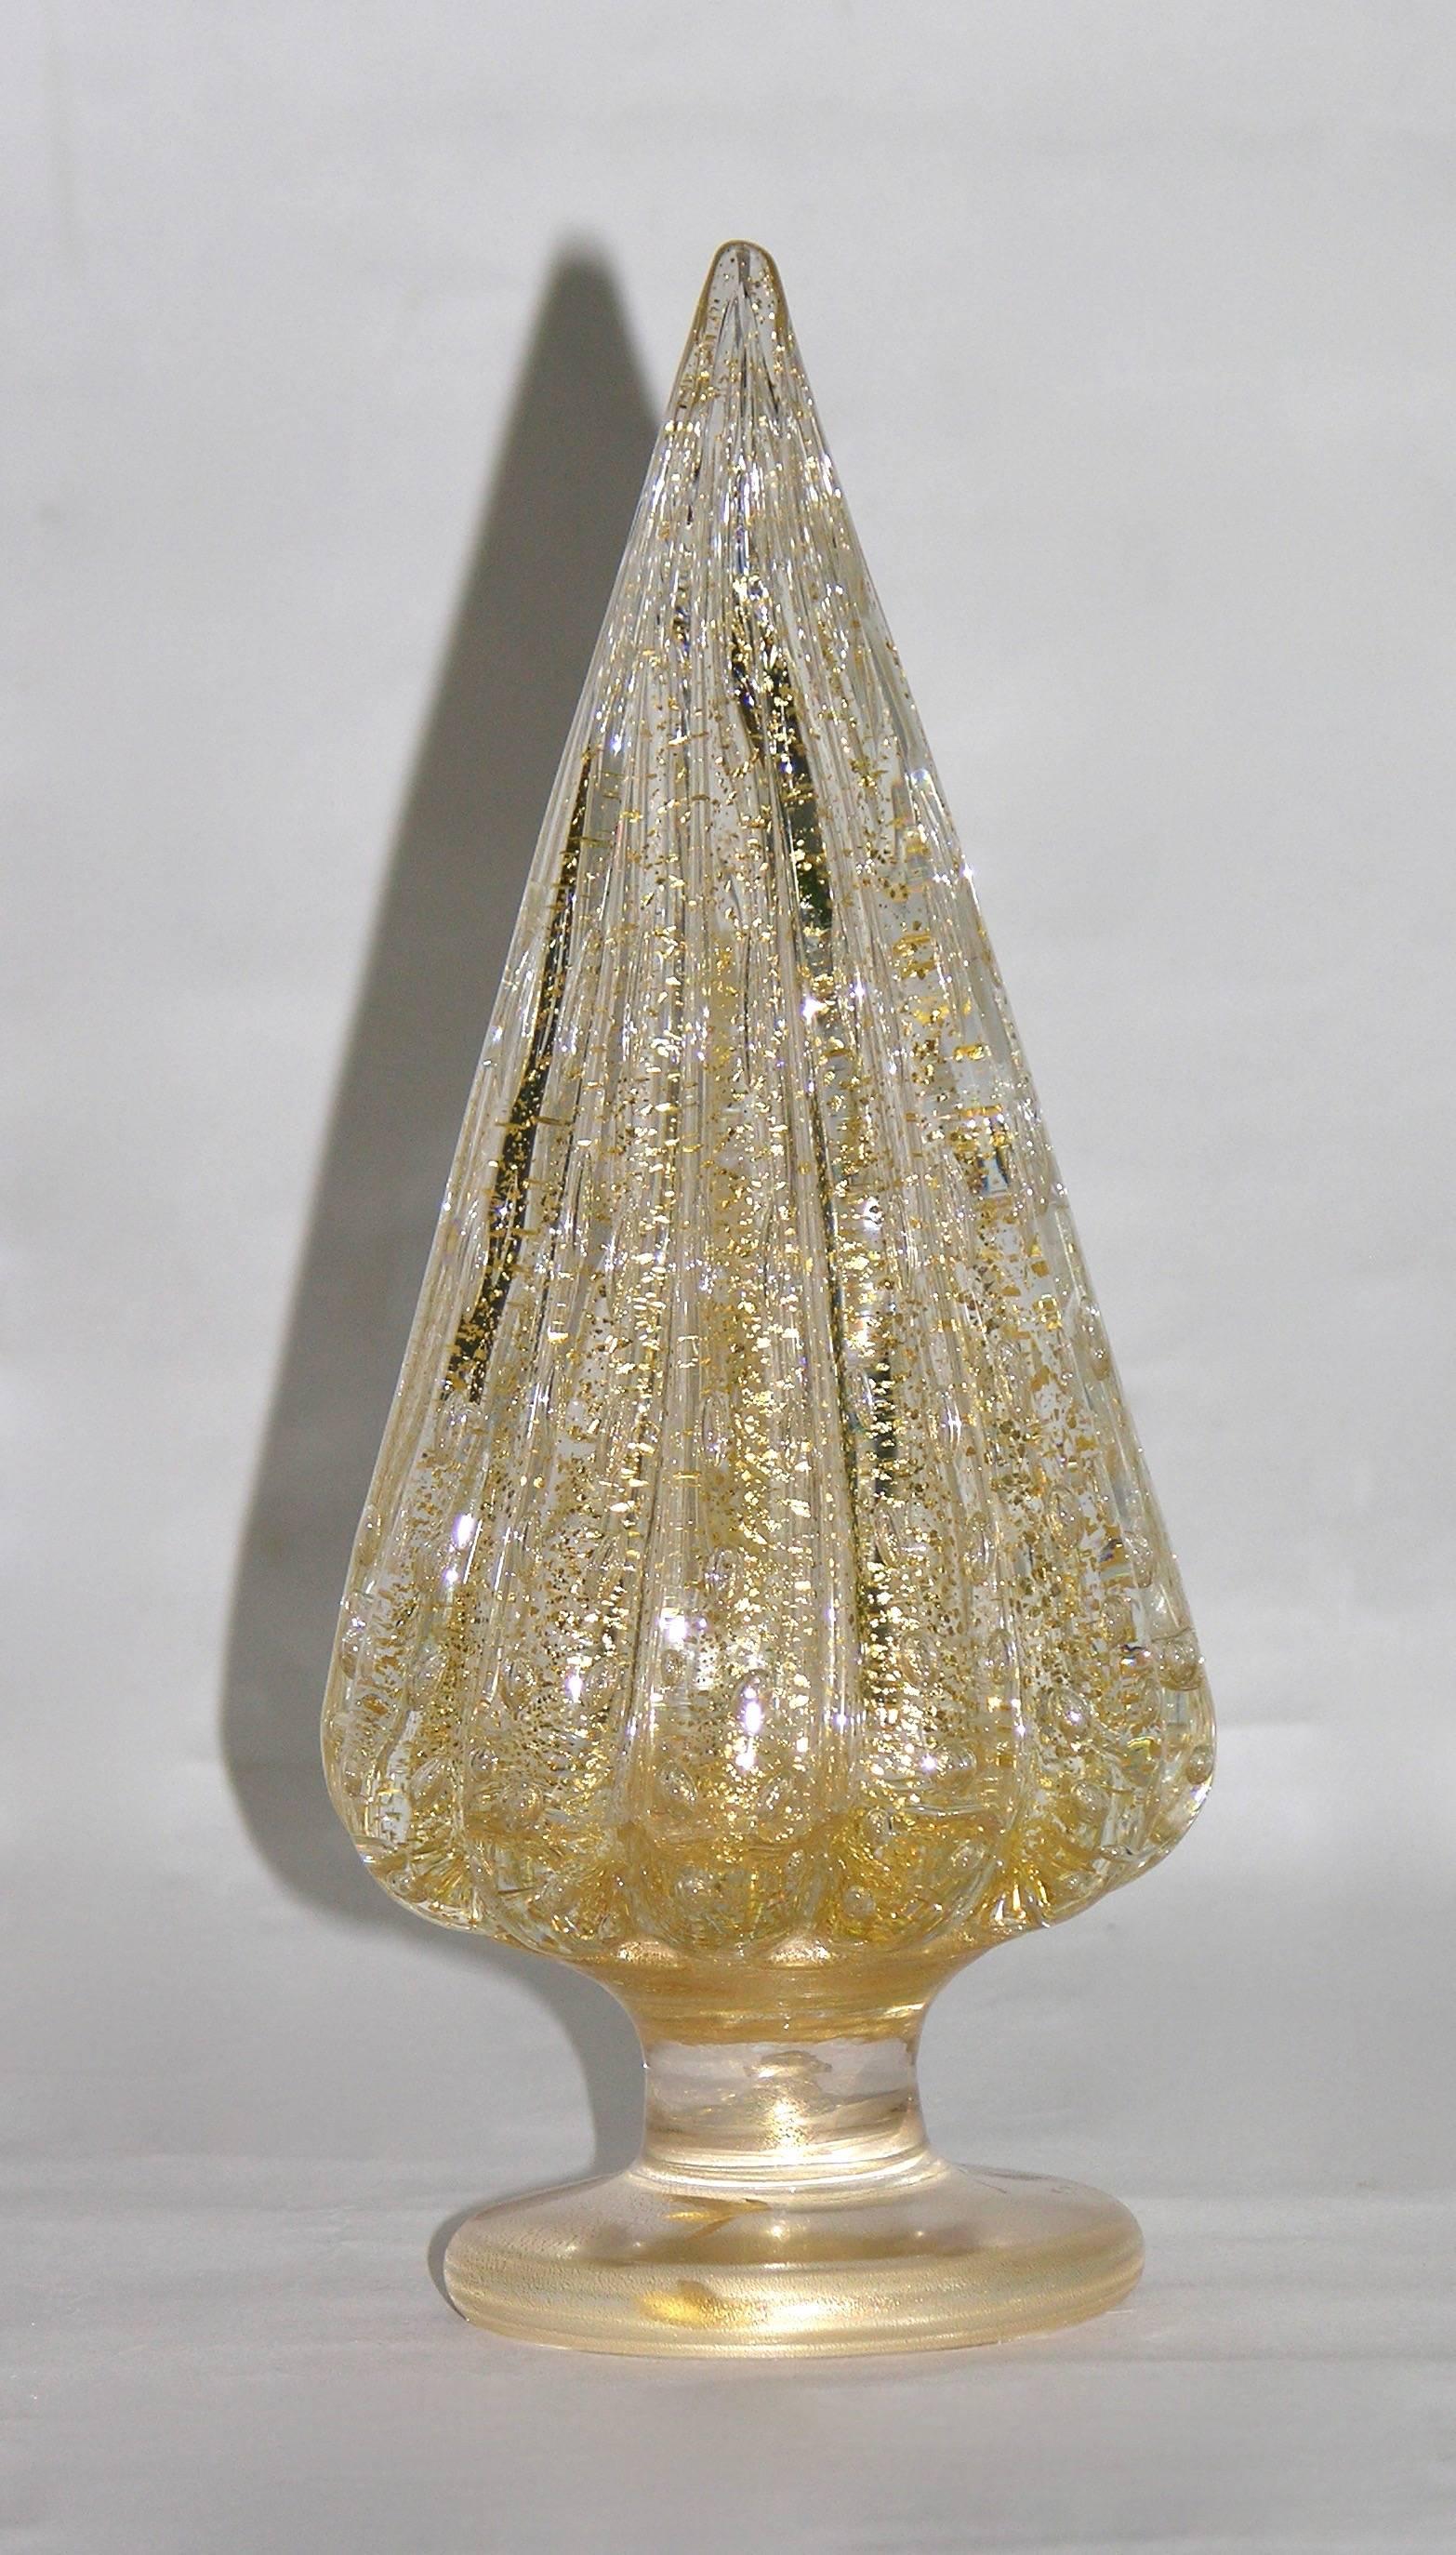 Gold 1980s Italian Vintage Colorful Murano Glass Christmas Trees Sculptures by Formia